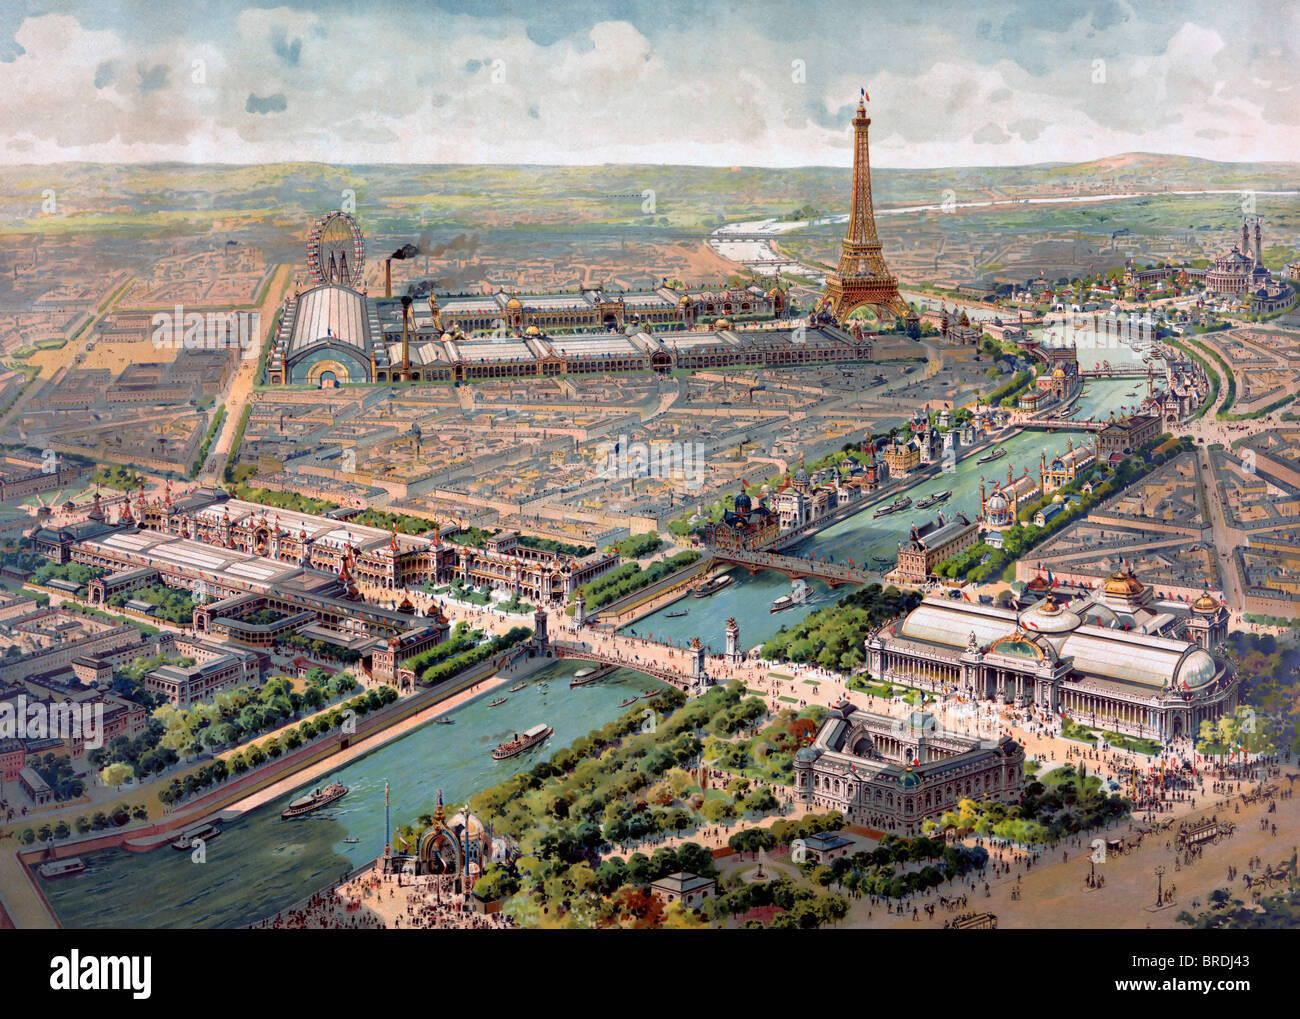 Panoramic View of the World's Fair of 1900, Paris, France Stock Photo